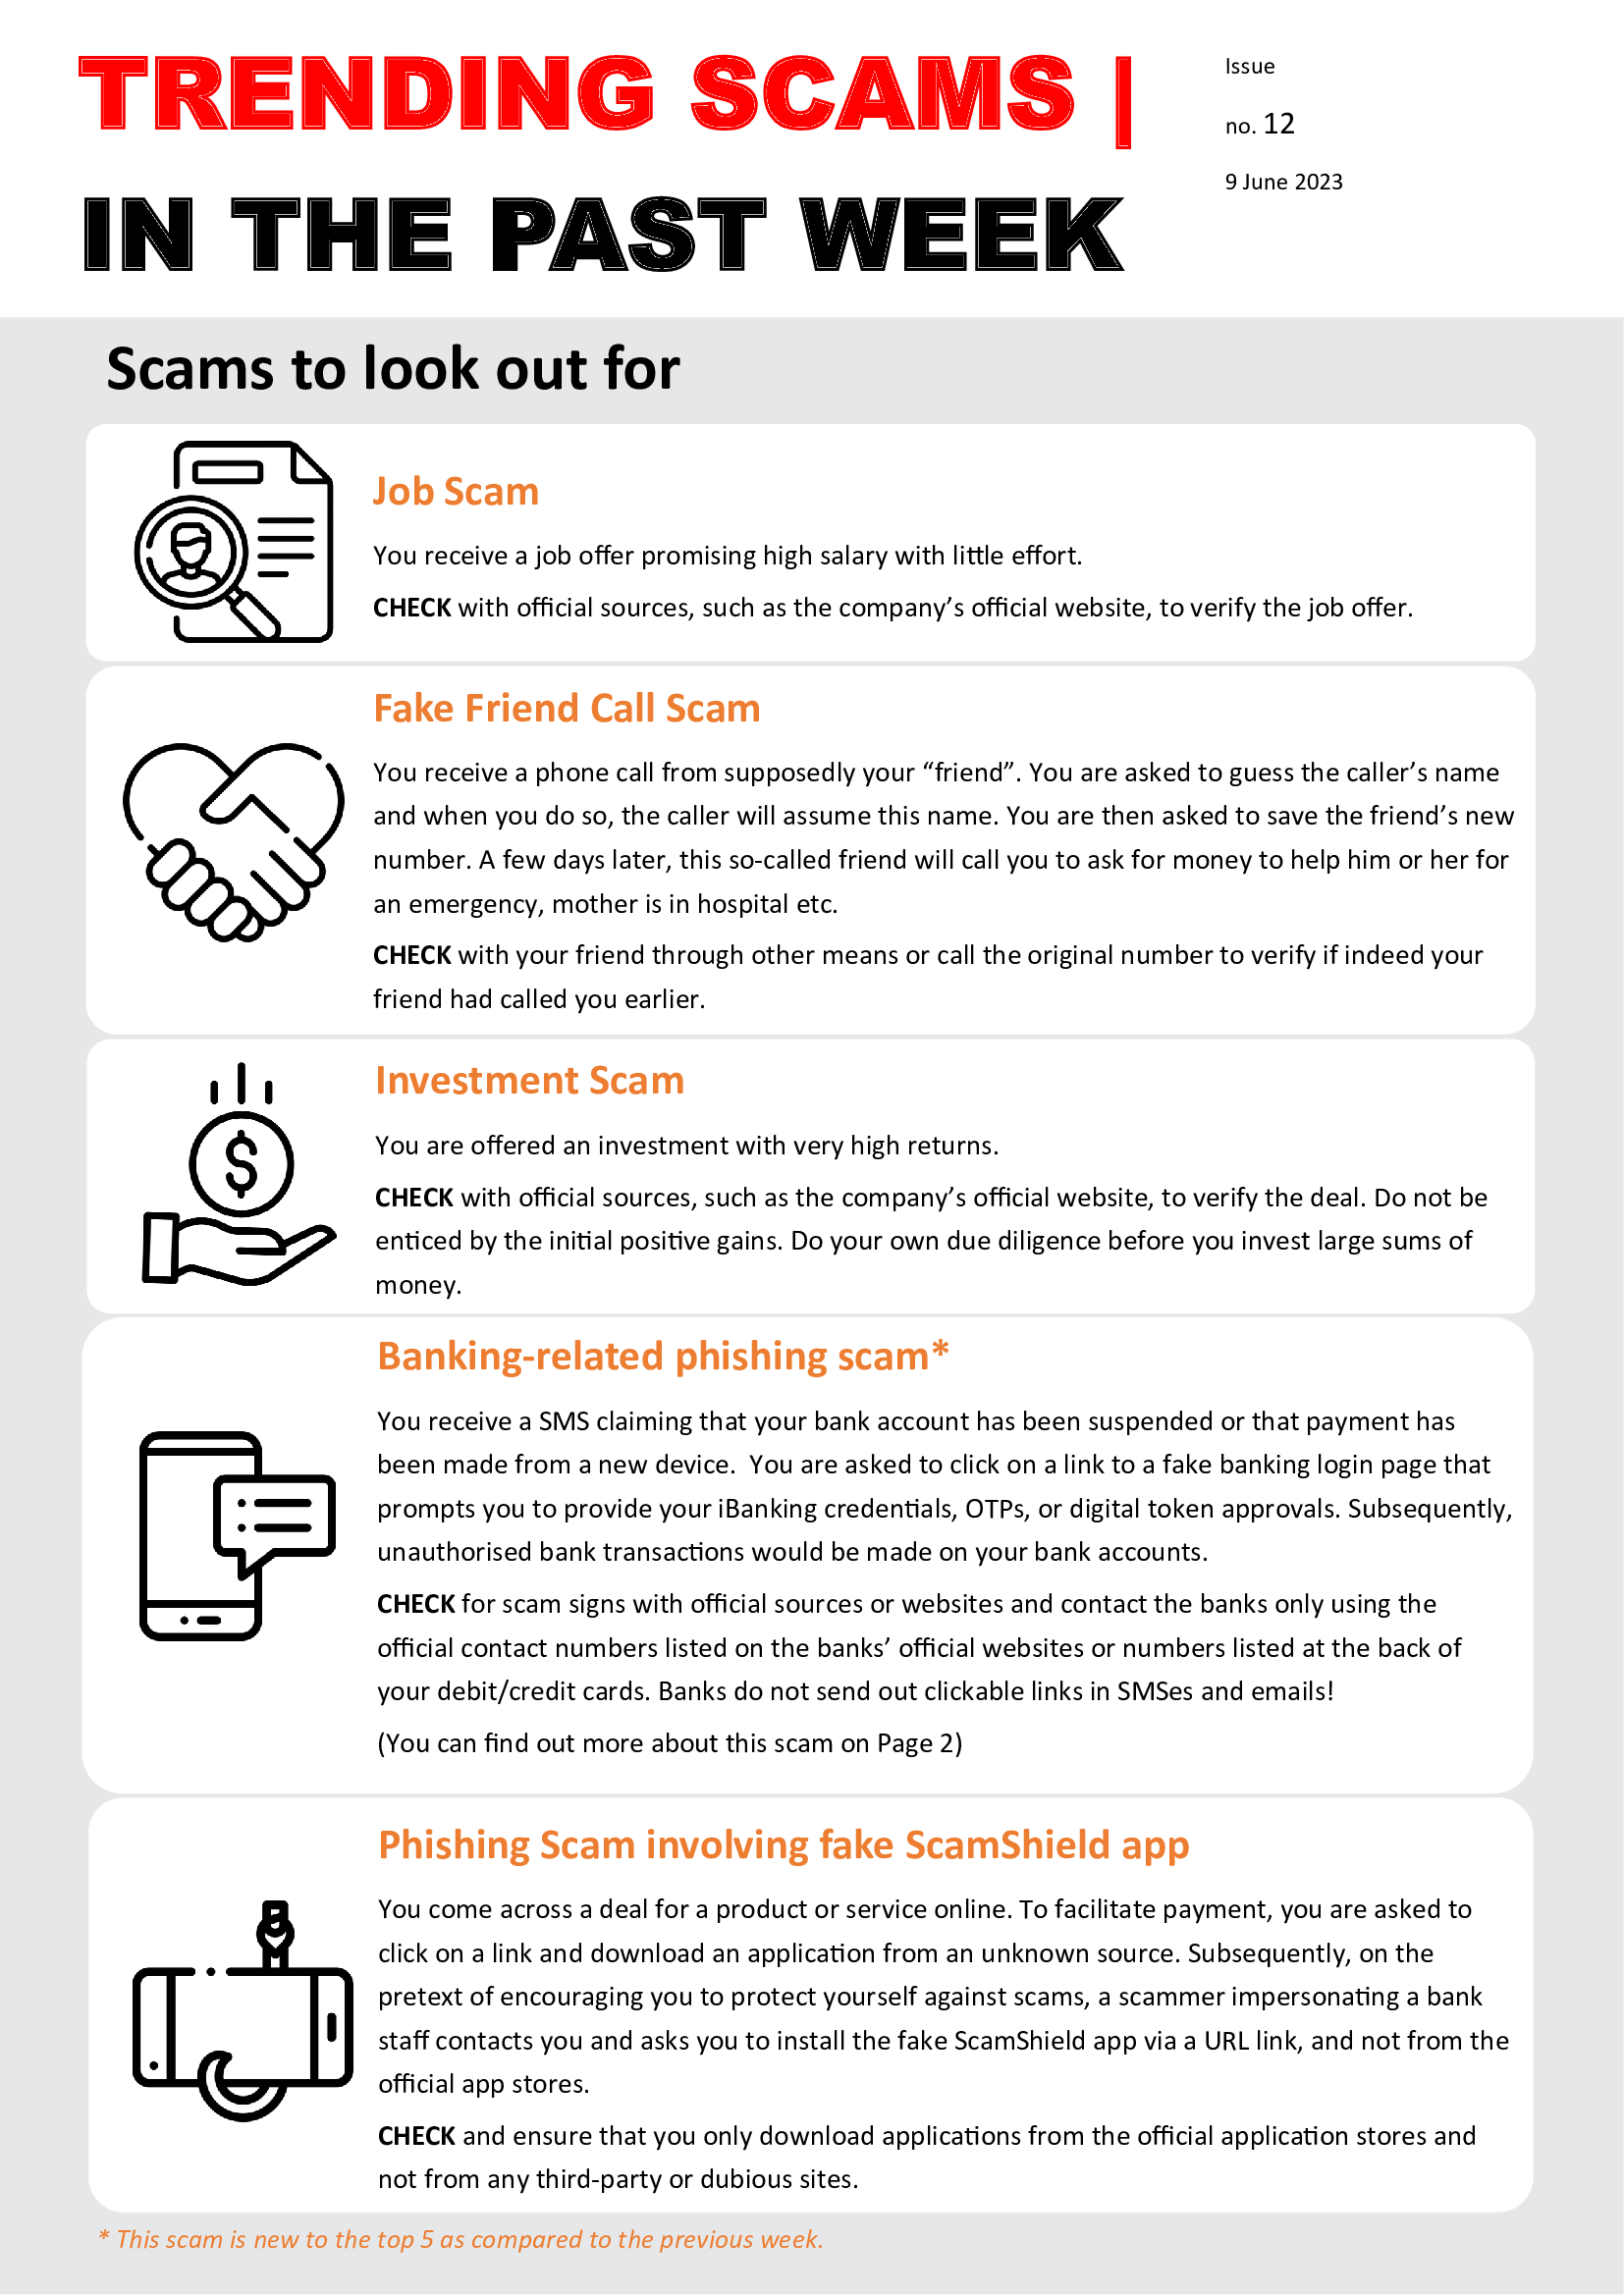 Weekly Bulletin Issue 12 - Trending Scams